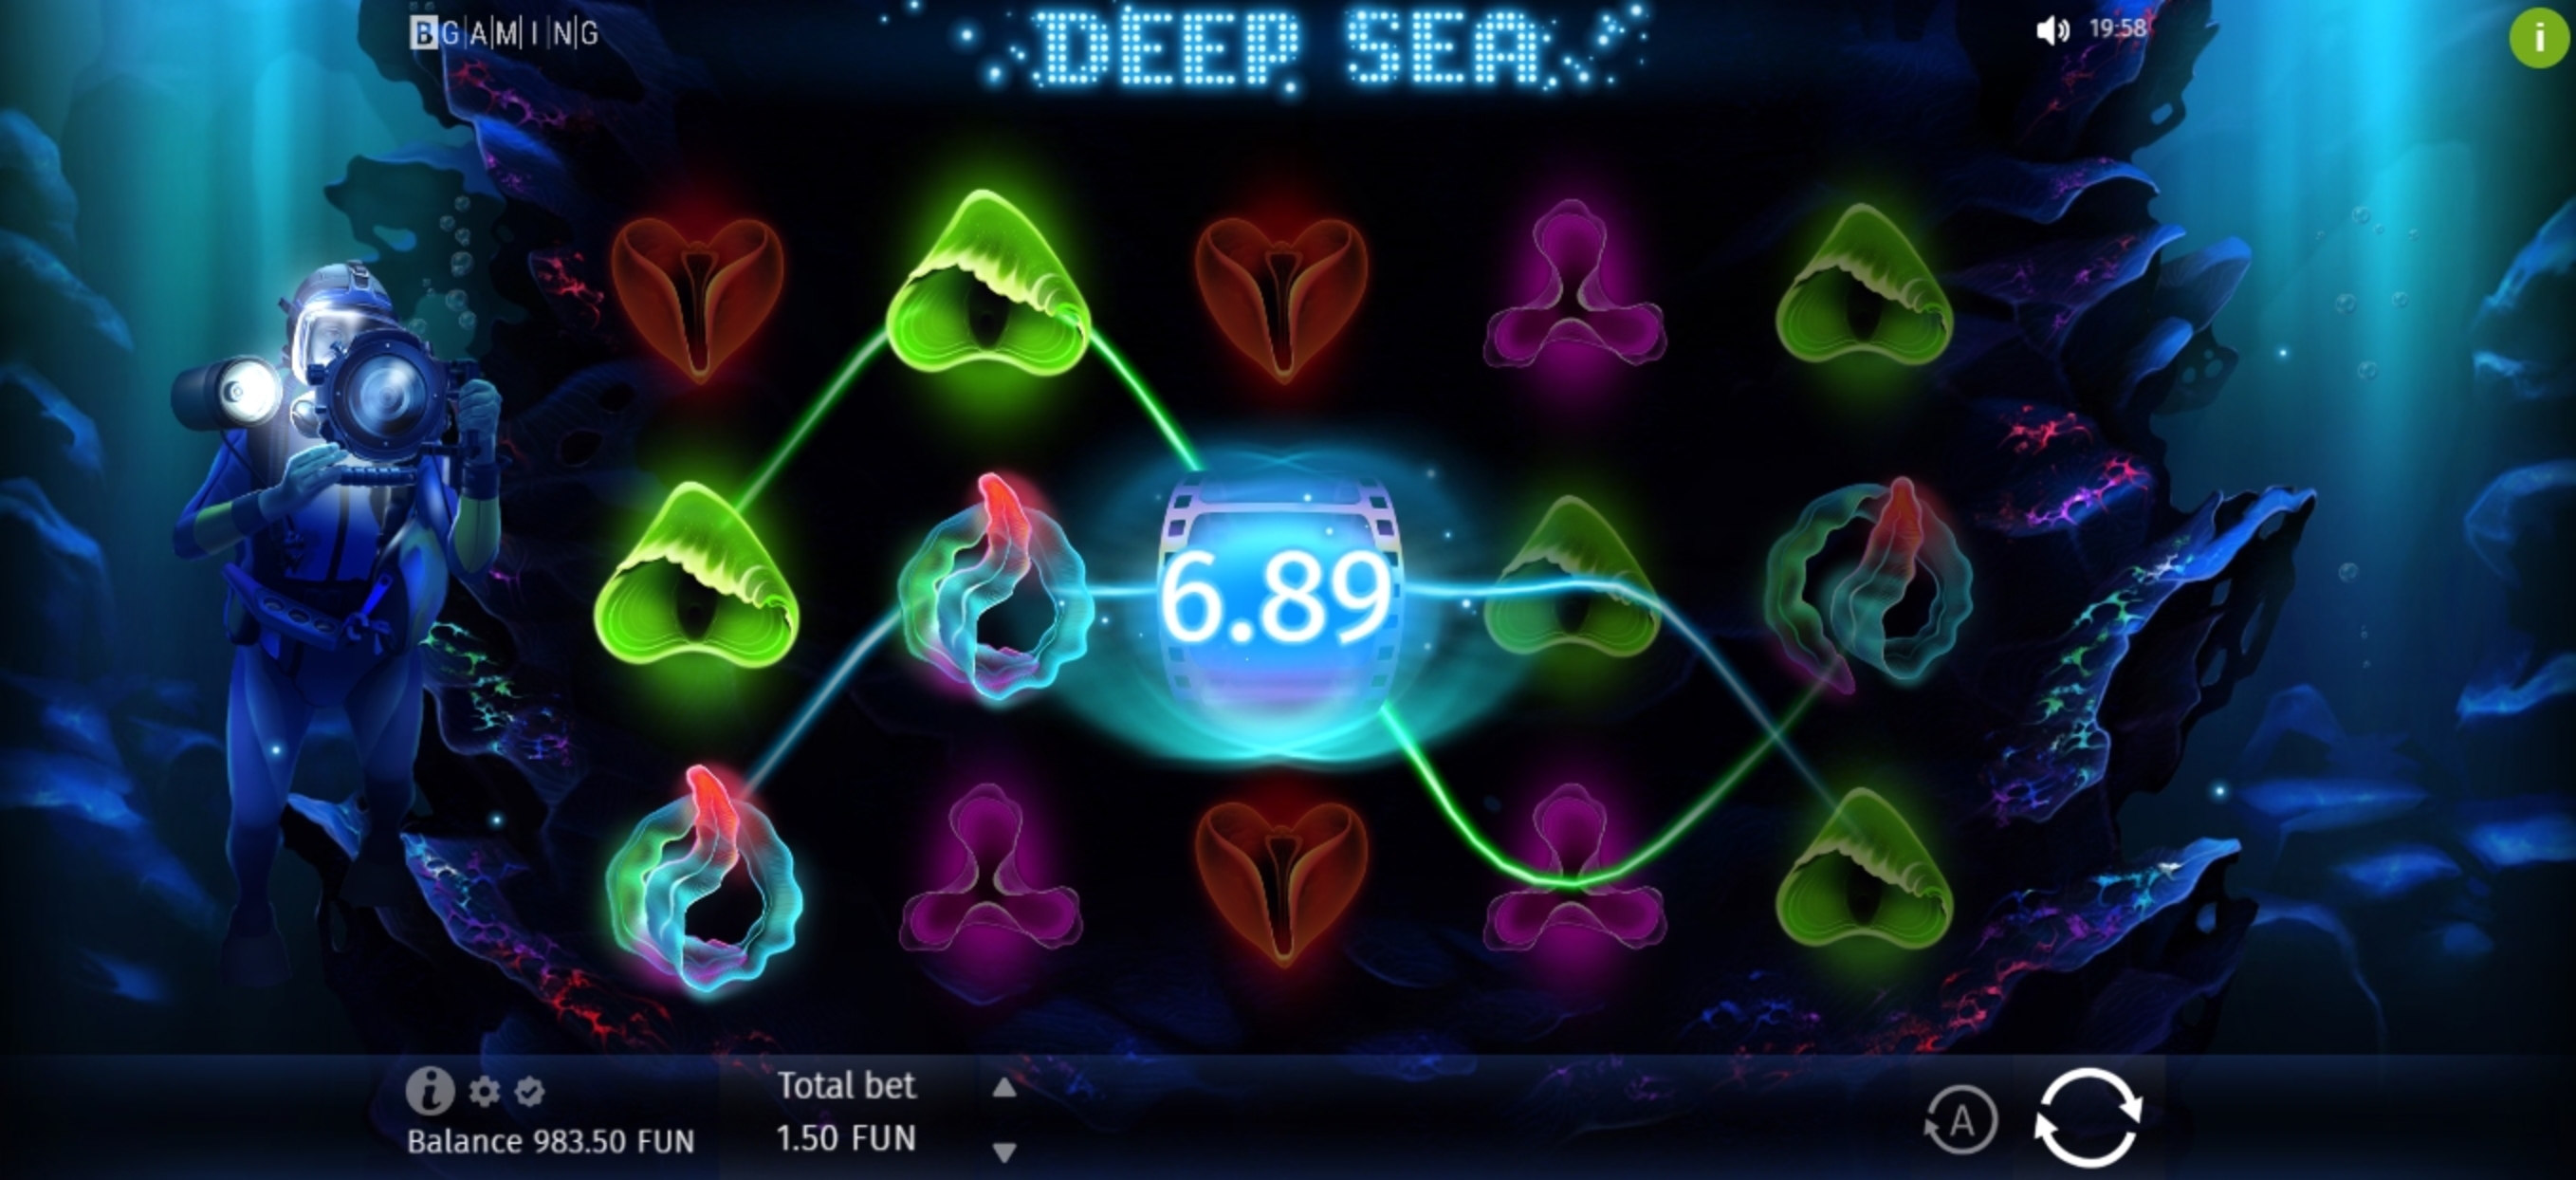 Win Money in Deep Sea Free Slot Game by BGAMING